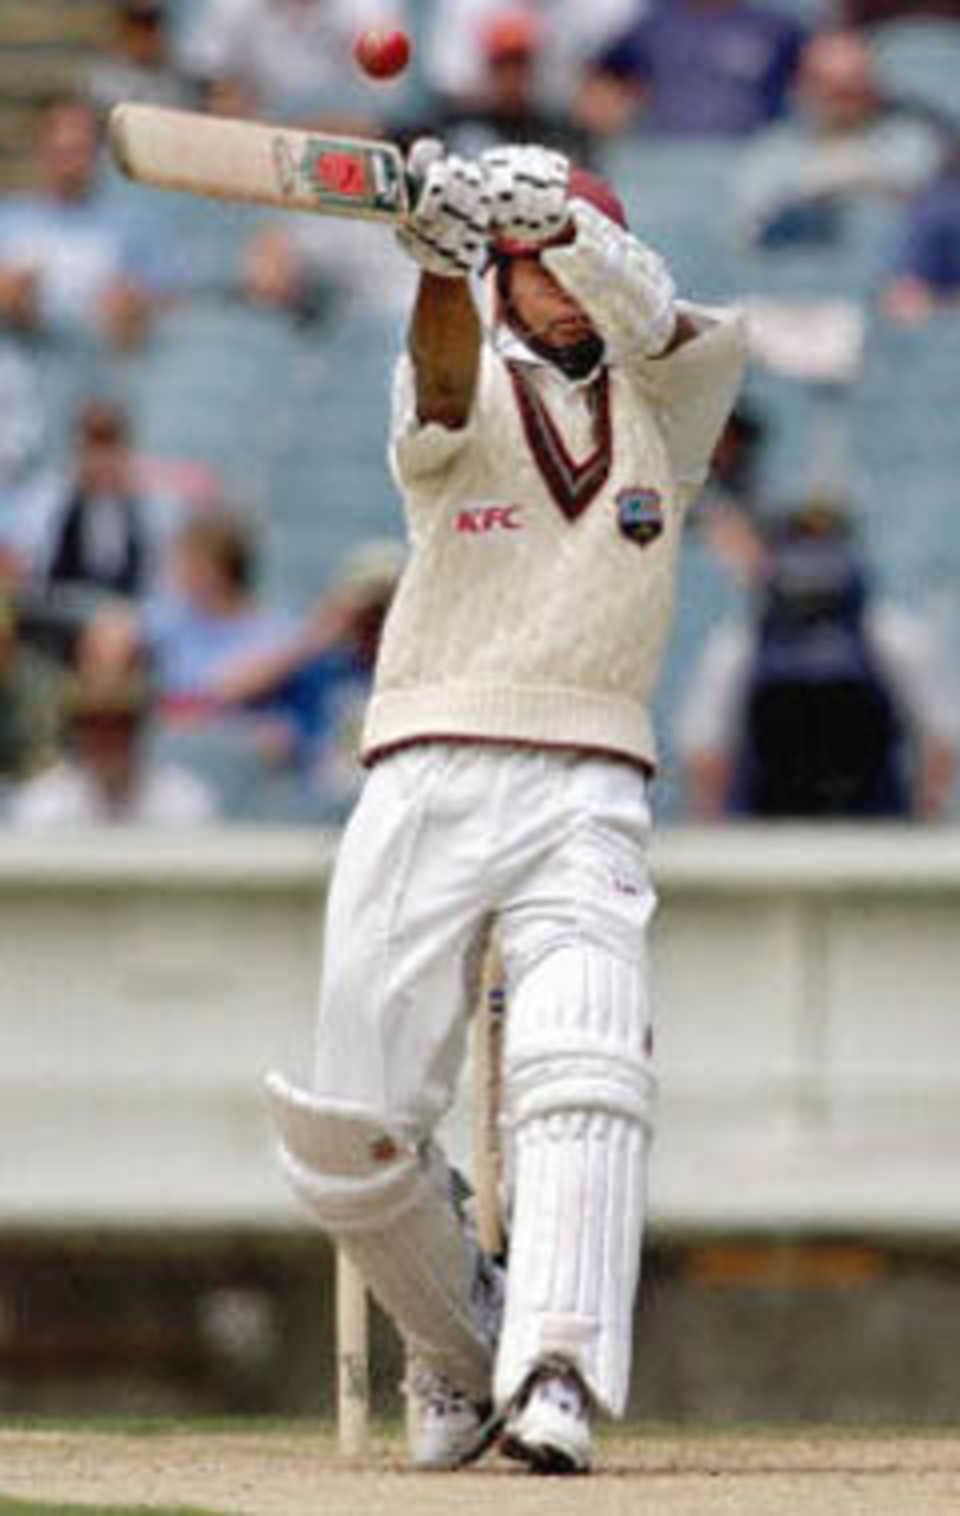 West Indian batsman Marlon Samuels who was his team sole resistance, attempts to hook as Australian defeats the West Indies on the fourth day of the fourth Test match at the MCG in Melbourne, 29 December 2000. Australia won the match by 352 run with Gillespie demolishing the West Indies taking 6-40. Australia lead the series 4-0 and extend their world record winning run to fourteen consecutive victories.